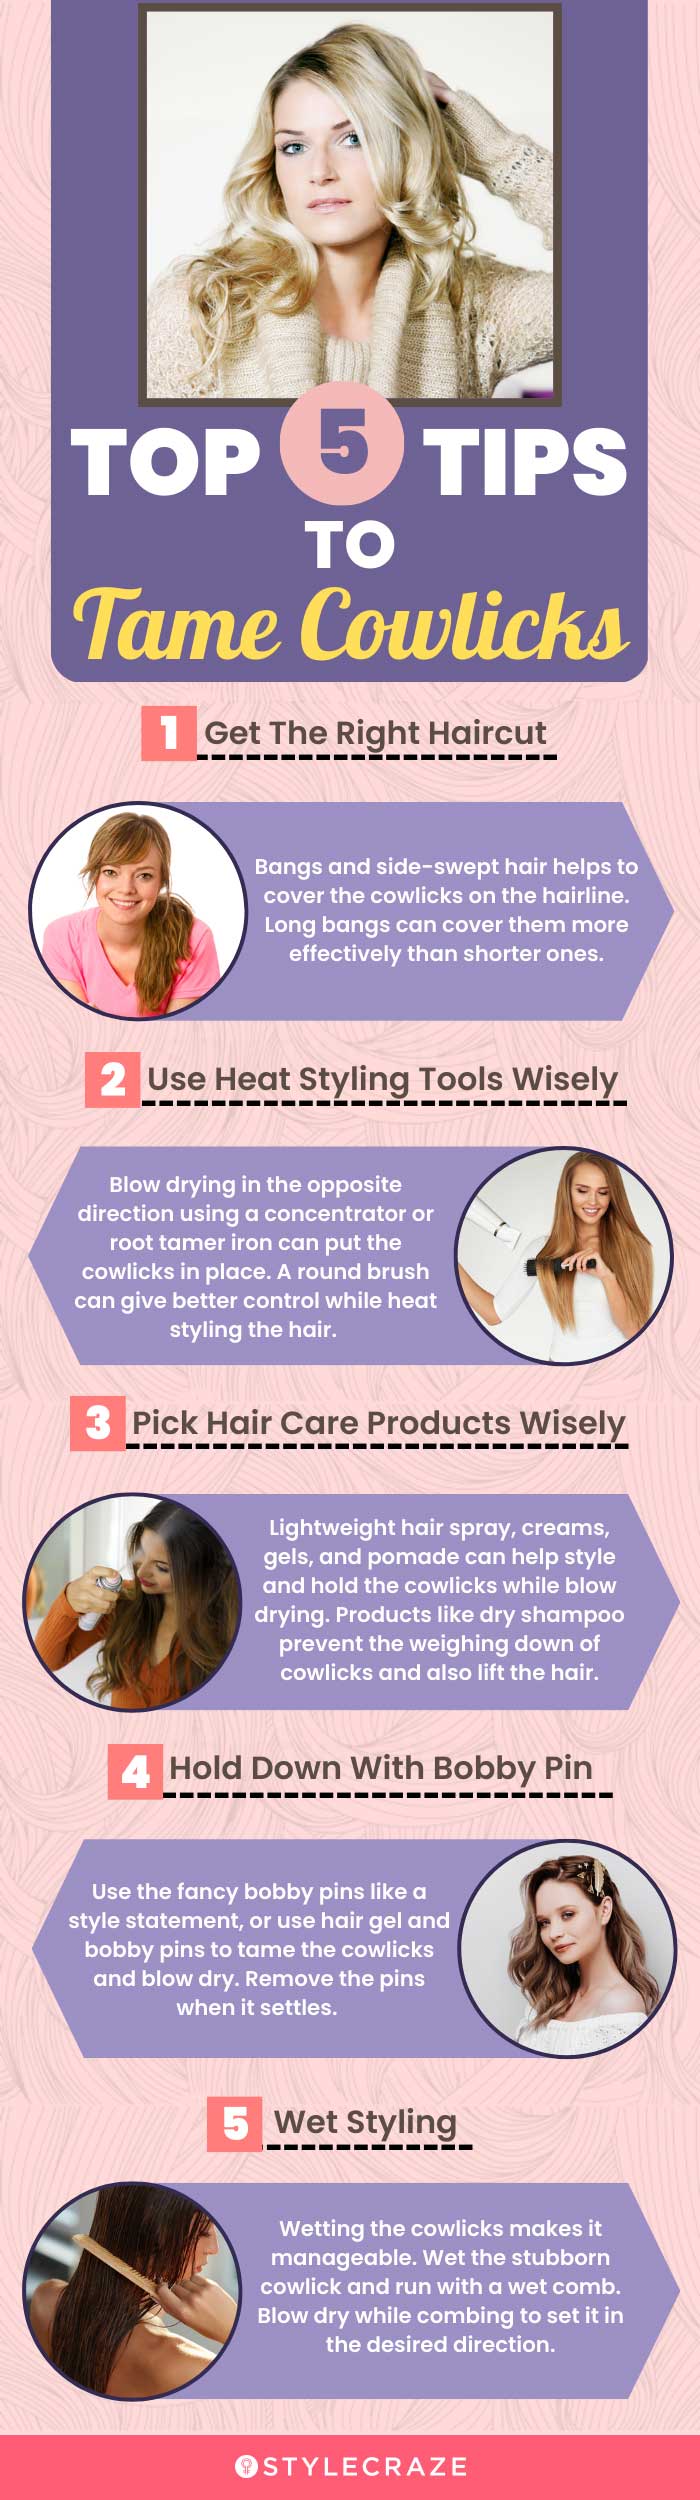 7 Ways To Manage A Cowlick & Best Hairstyles For Cowlicks